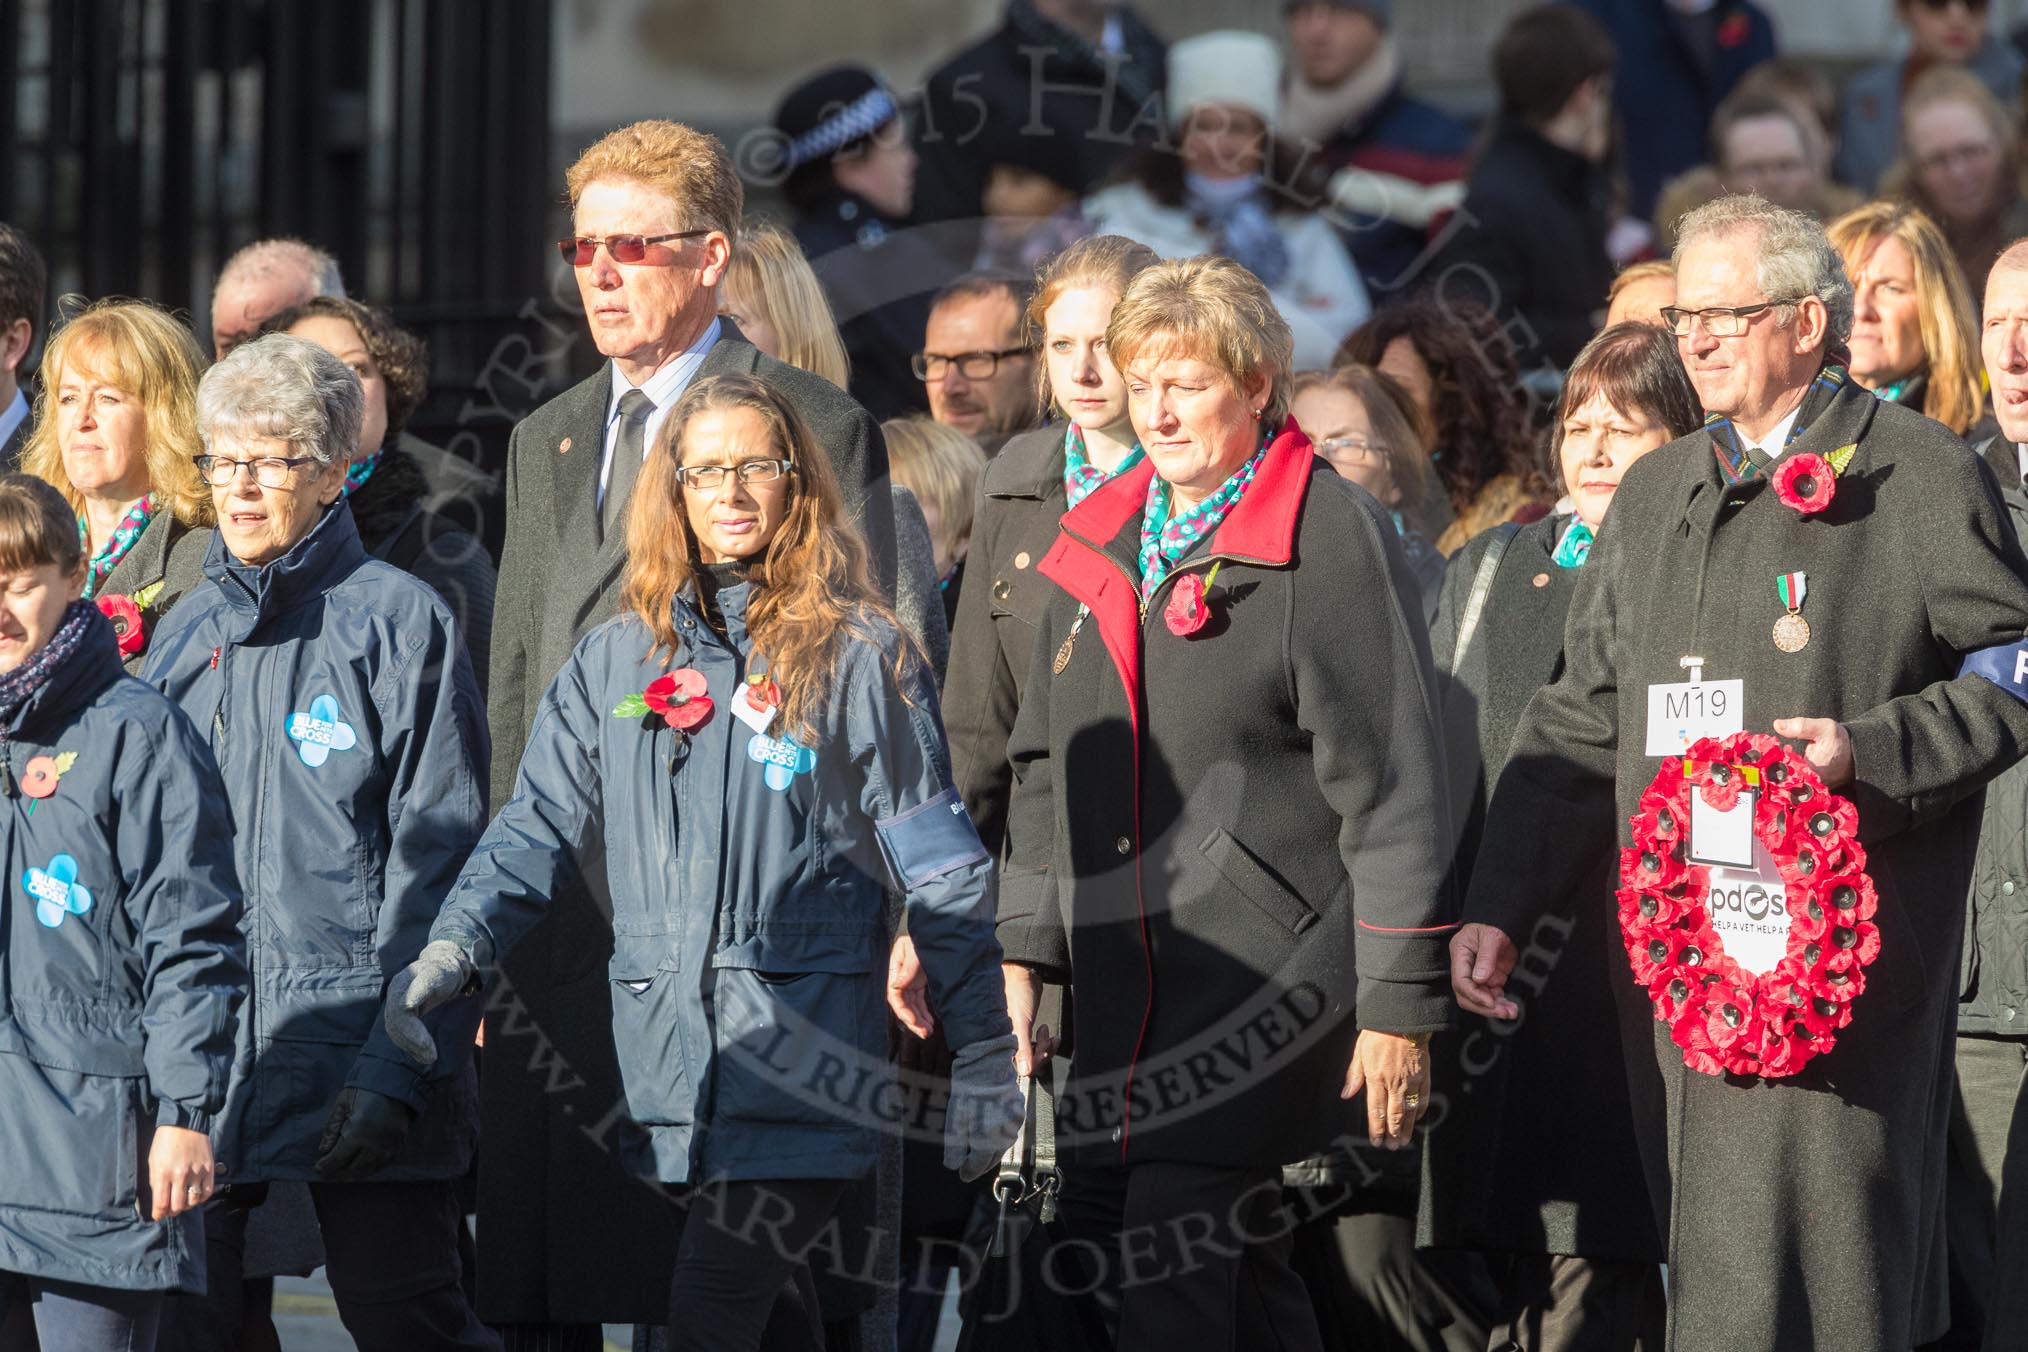 March Past, Remembrance Sunday at the Cenotaph 2016: M19 PDSA.
Cenotaph, Whitehall, London SW1,
London,
Greater London,
United Kingdom,
on 13 November 2016 at 13:16, image #2637